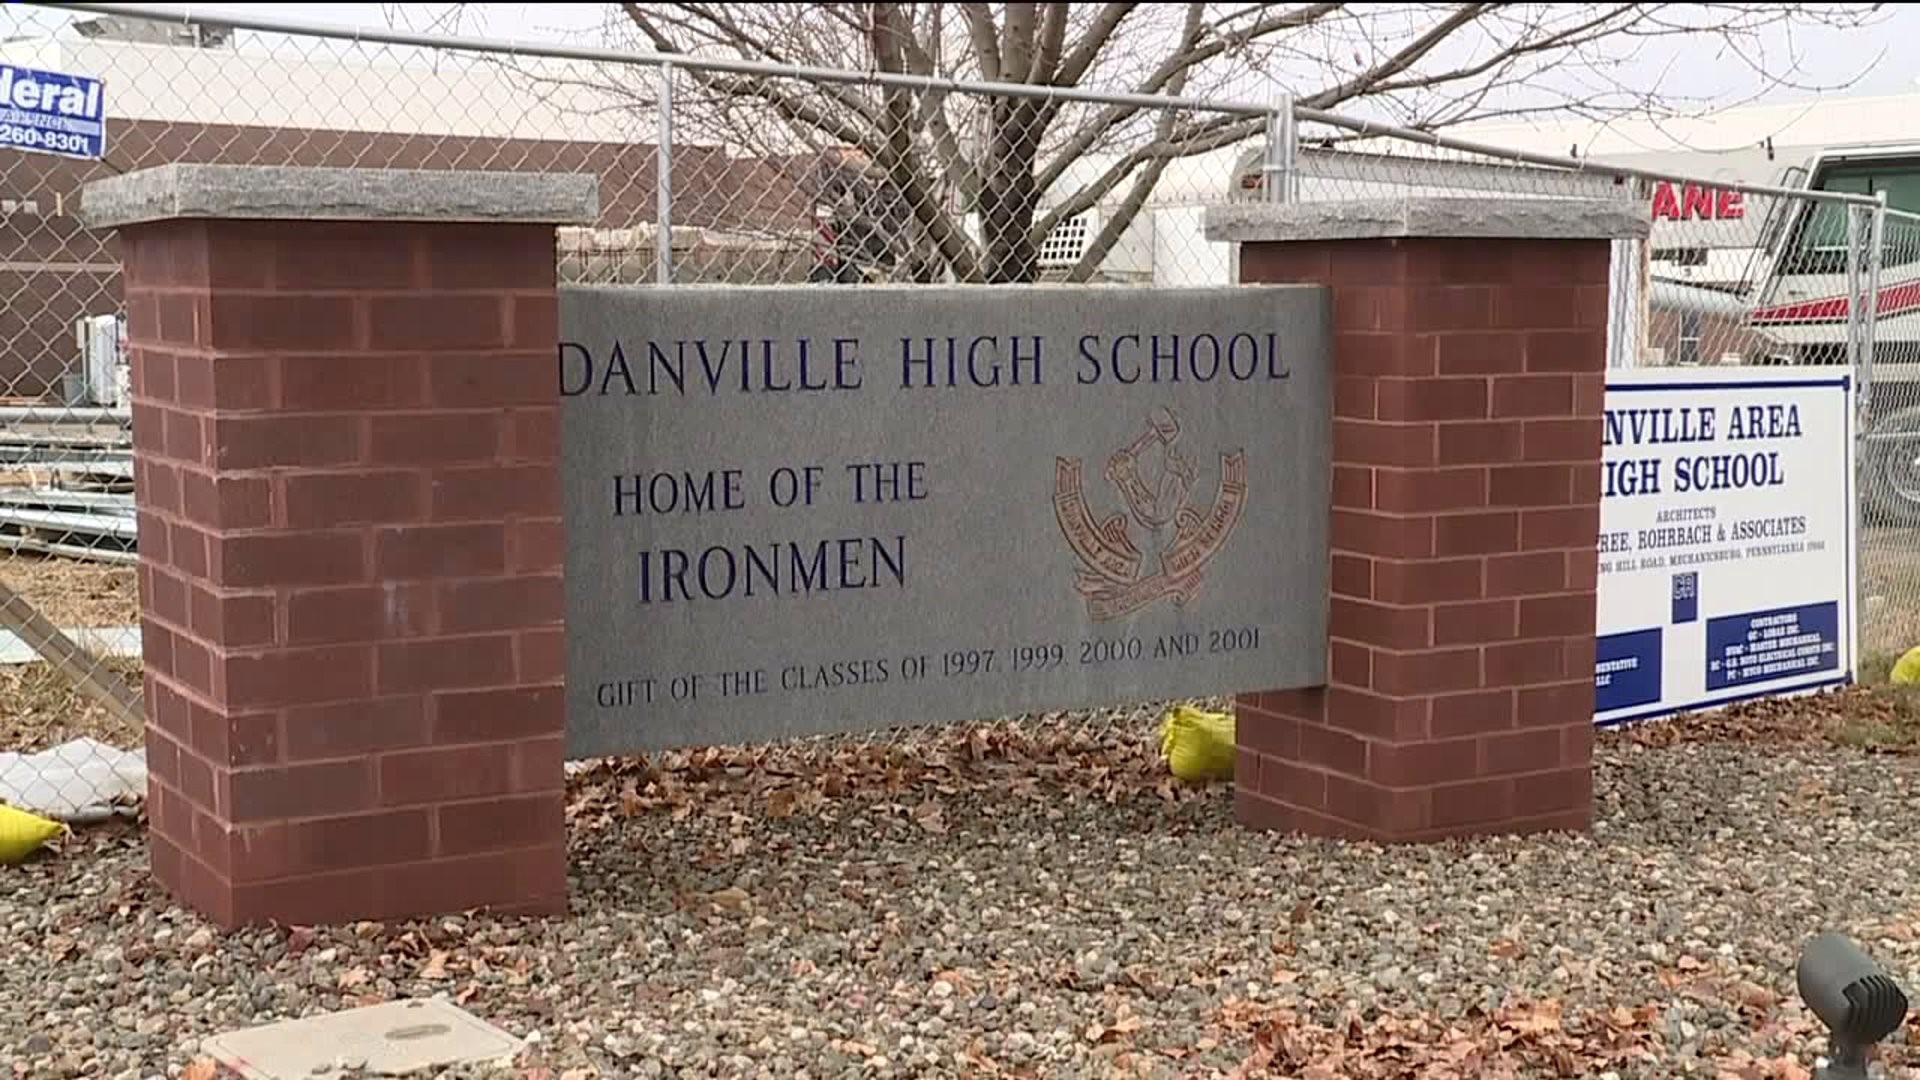 Student in Trouble for Threat in Danville